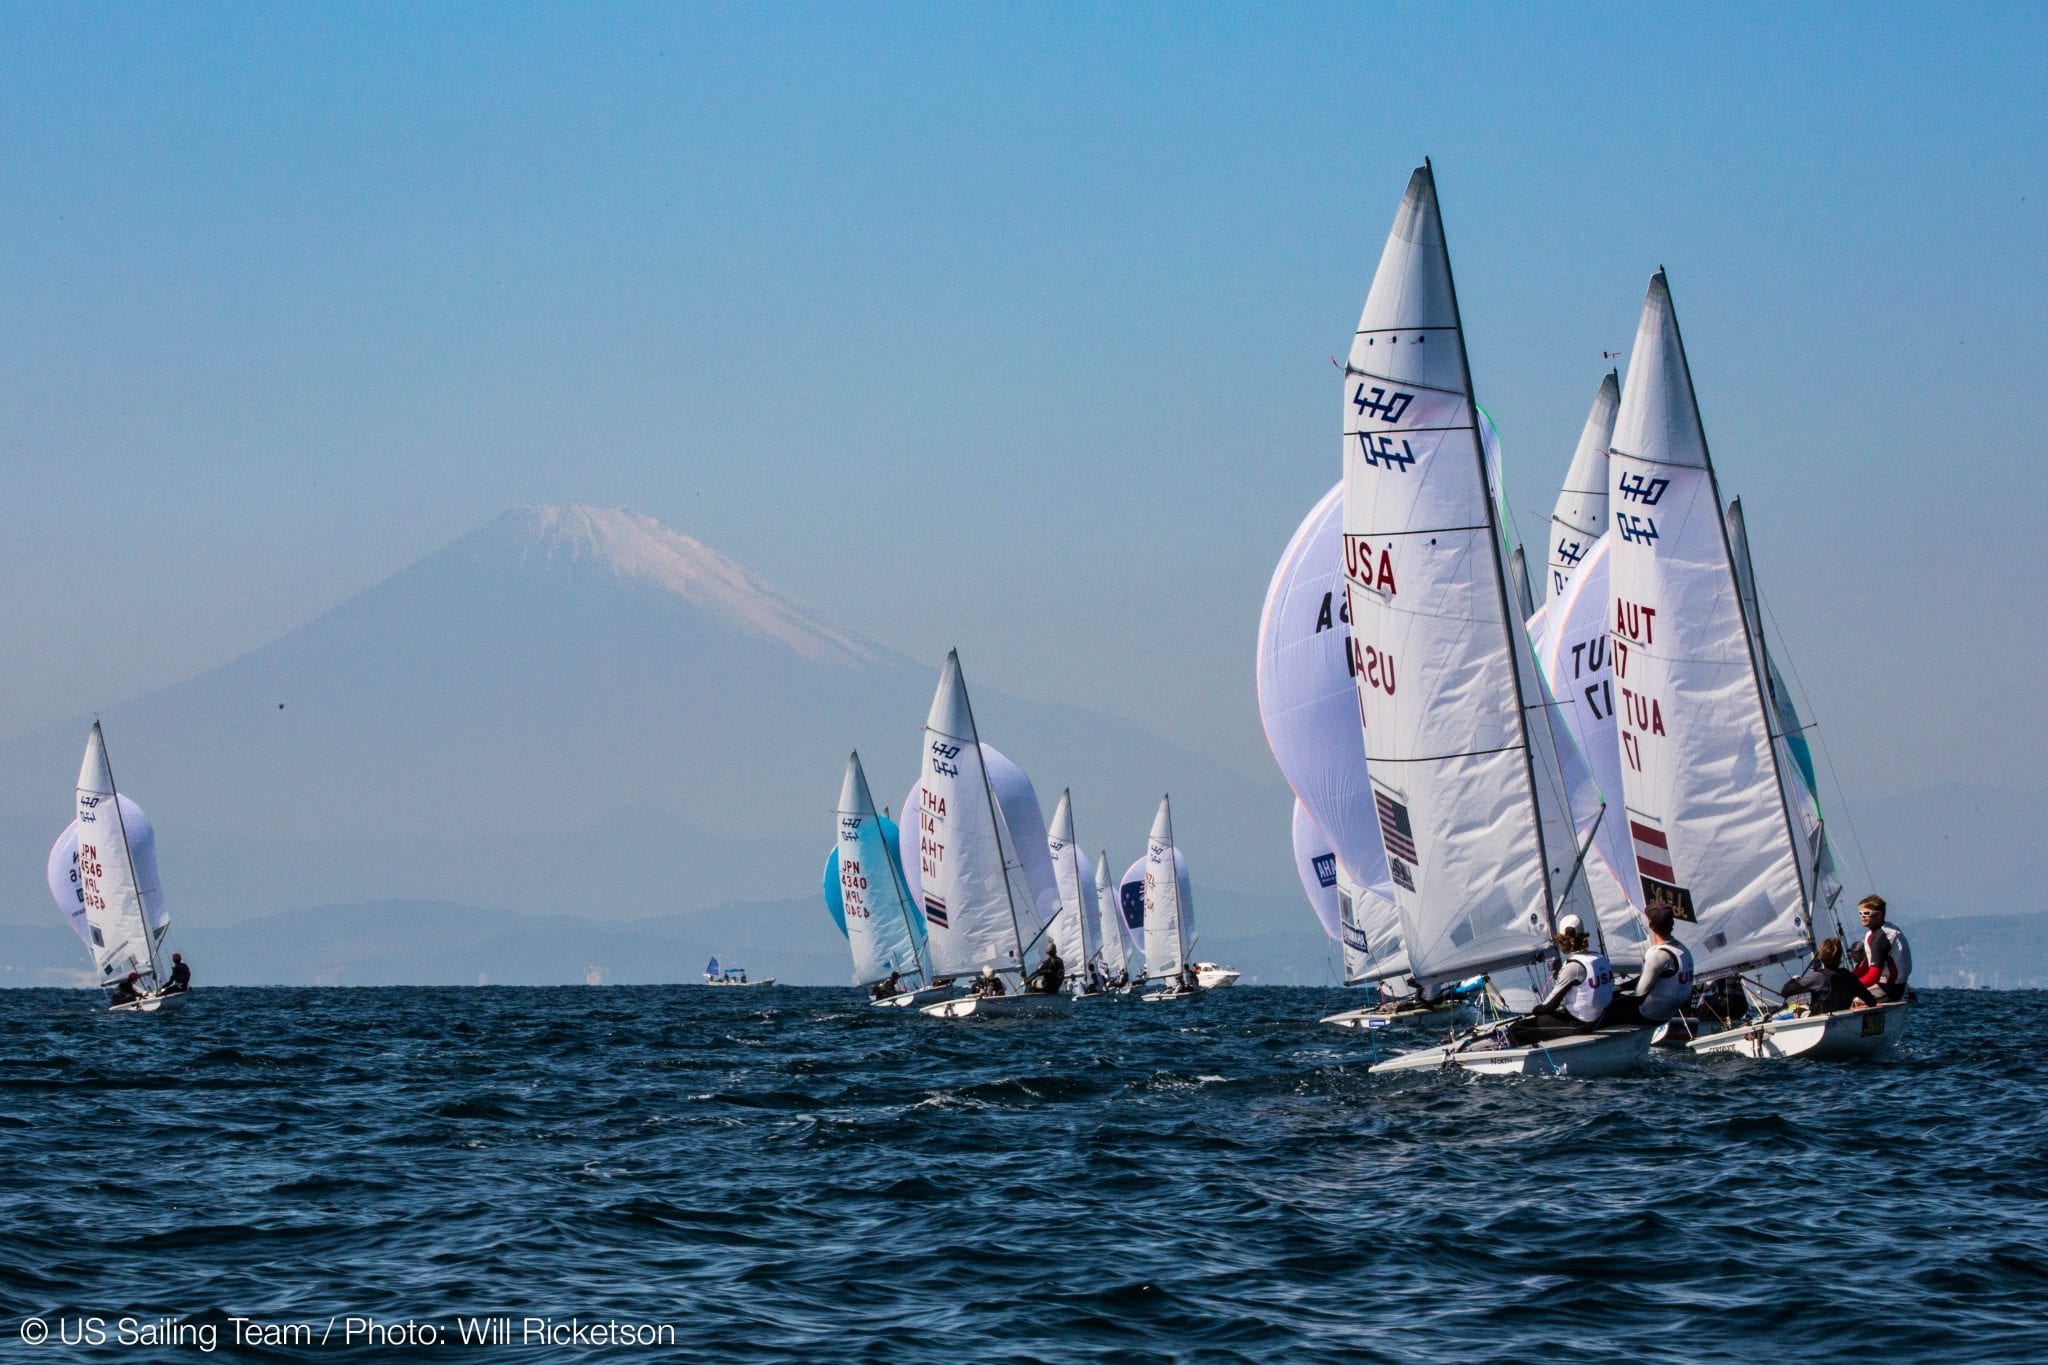 Photo: 470 fleet pictured with Mt. Fuji